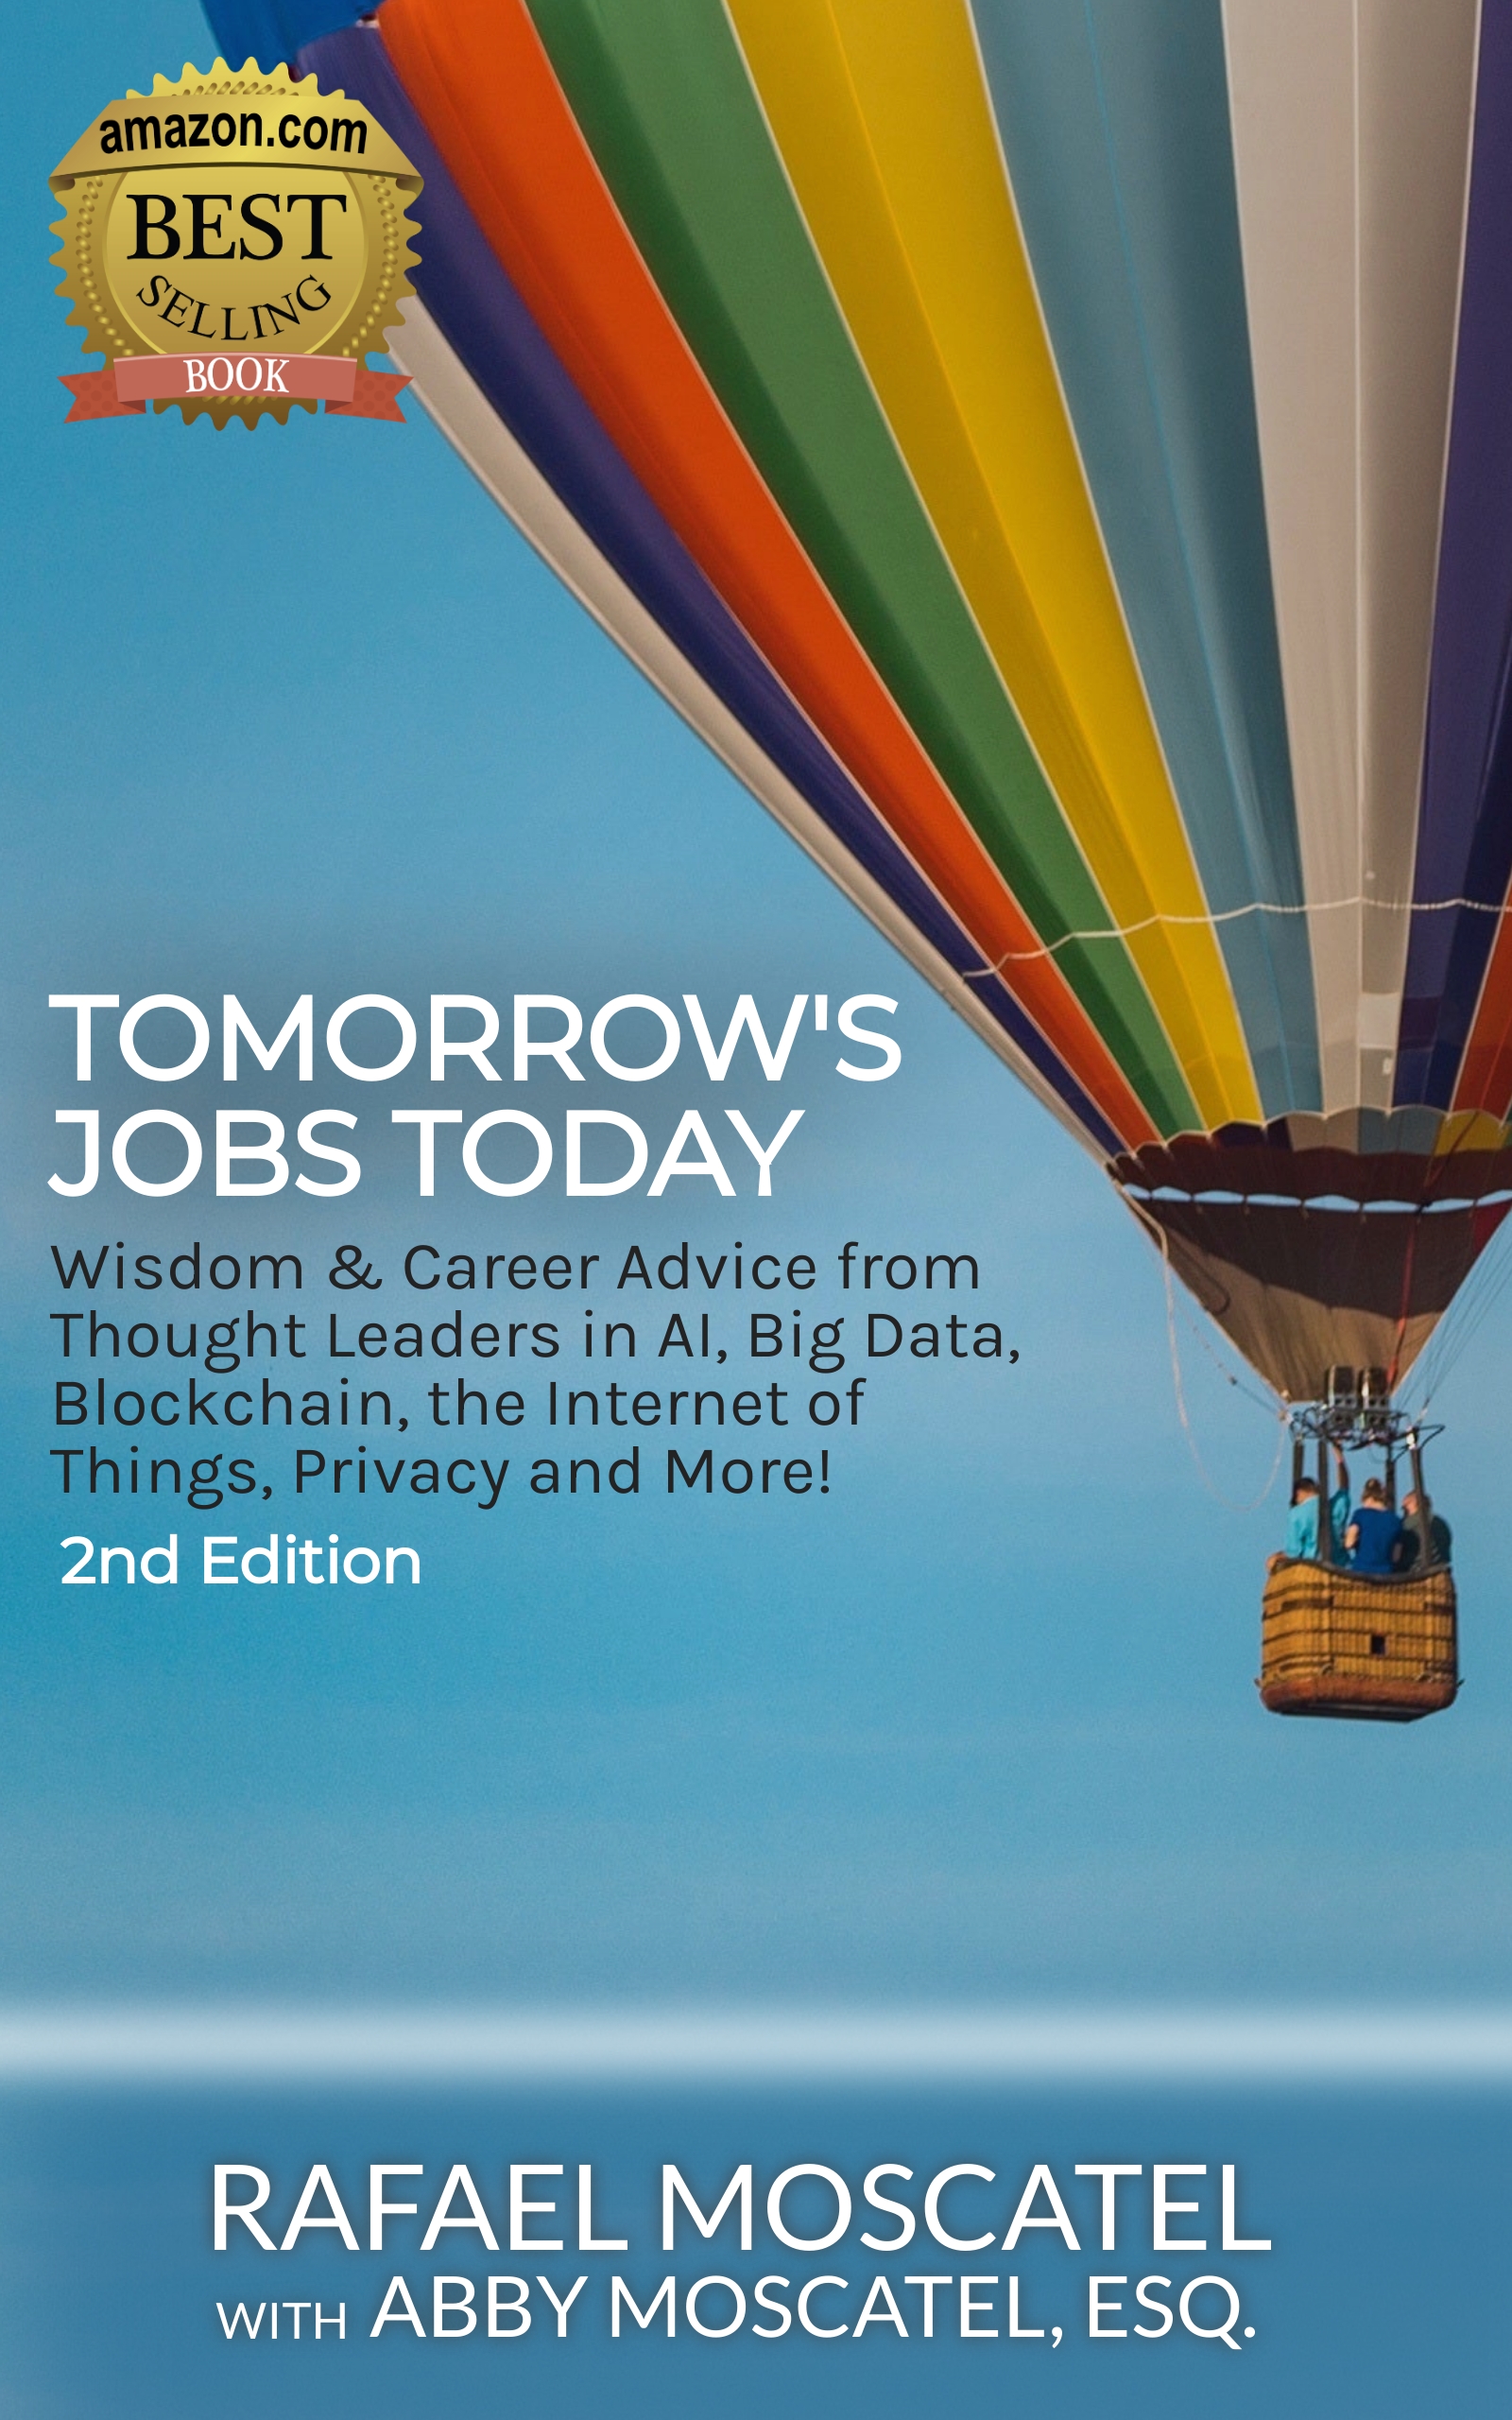 Tomorrow's Jobs Today, Wisdom & Career Advice from Thought Leaders in AI, Big Data, Blockchain, the Internet of Things, Privacy, and More